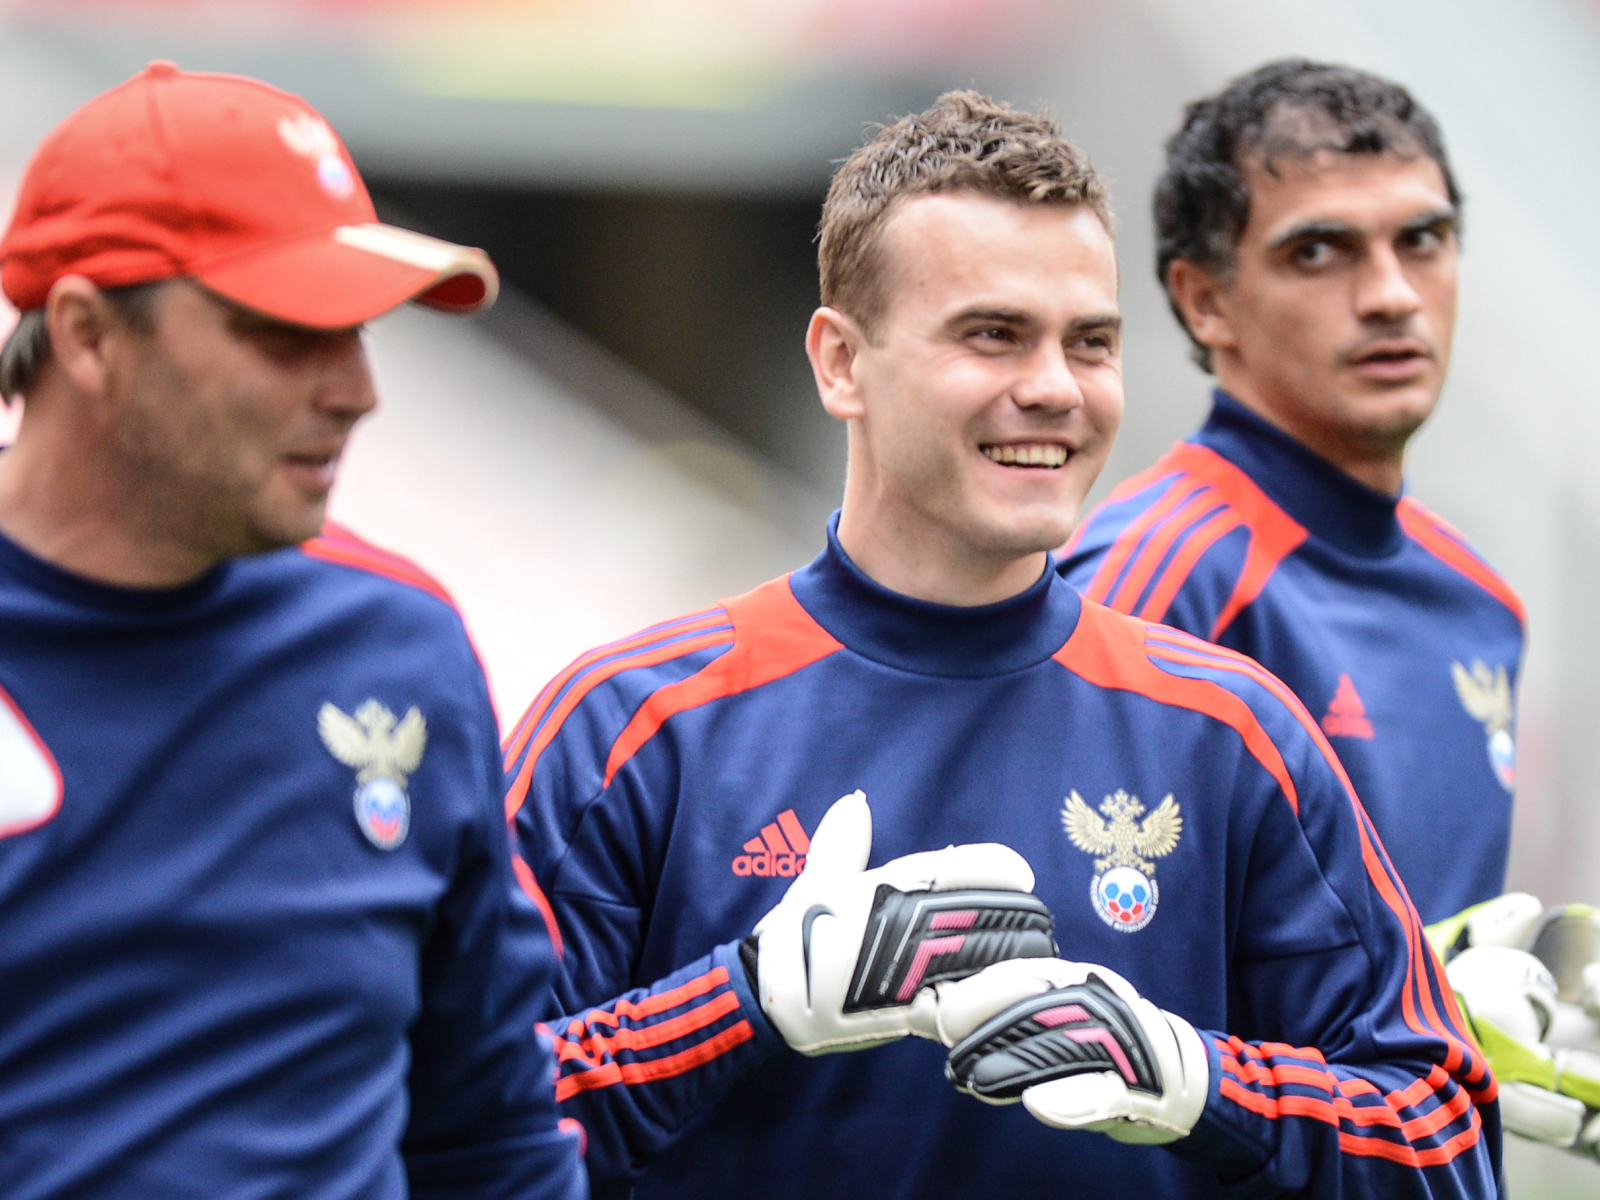 The best football player of CSKA Moscow Igor Akinfeev